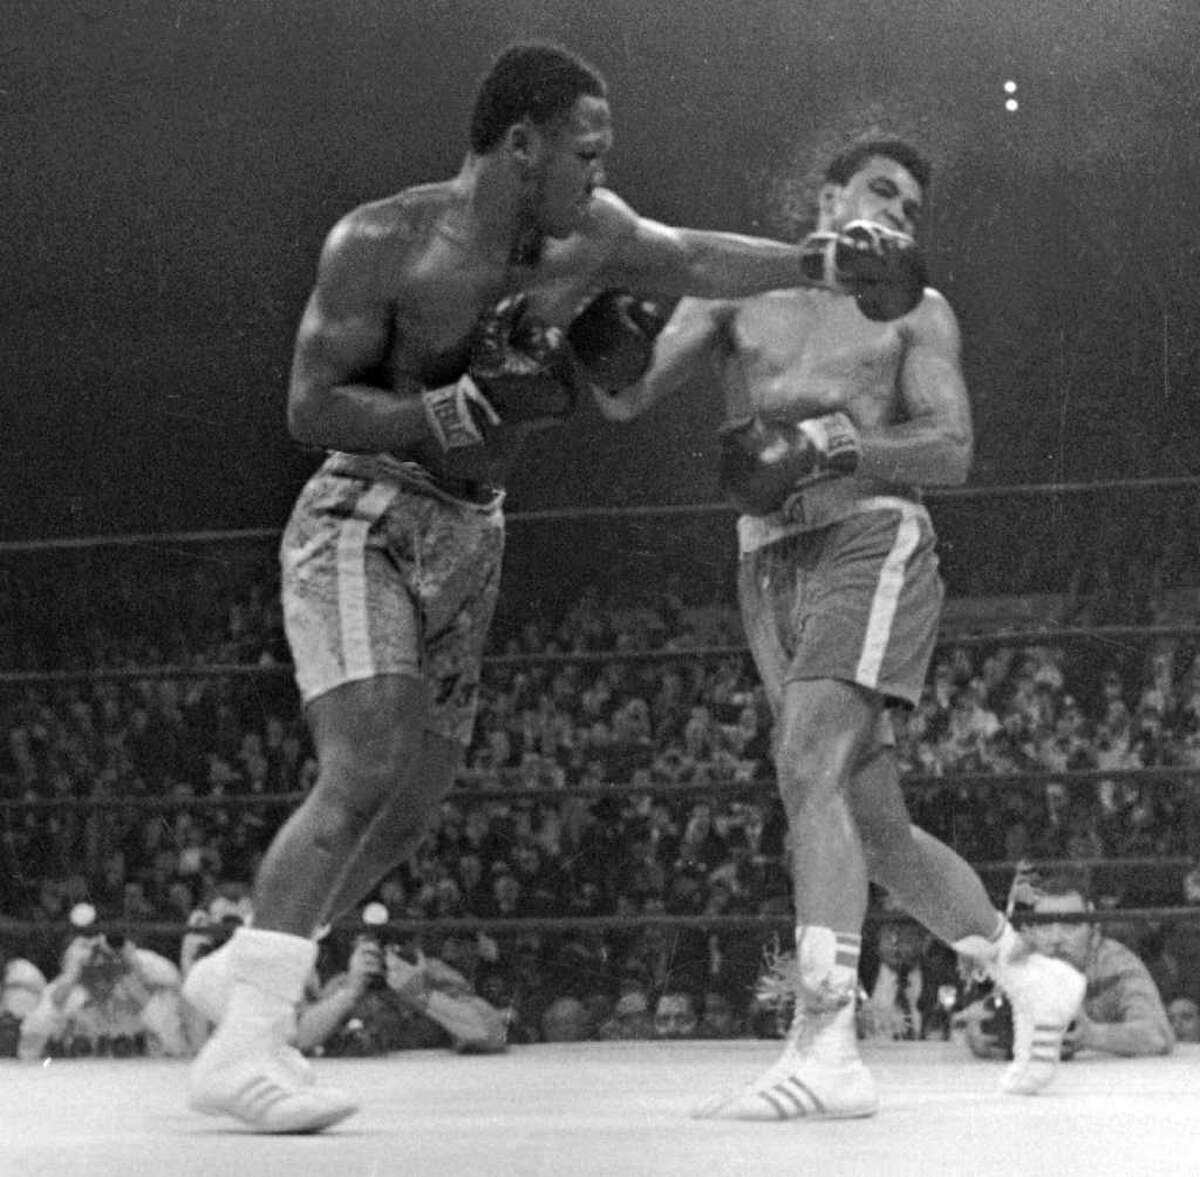 FILE - In this March 8, 1971, file photo, Muhammad Ali. right, takes a left from Joe Frazier during the 15th round of their heavyweight title boxing bout in New York. Frazier won a unanimous decision. Frazier, the former heavyweight champion who handed Ali his first defeat yet had to live forever in his shadow, died Monday Nov. 7, 2011 after a brief fight with liver cancer. He was 67. (AP Photo/File)